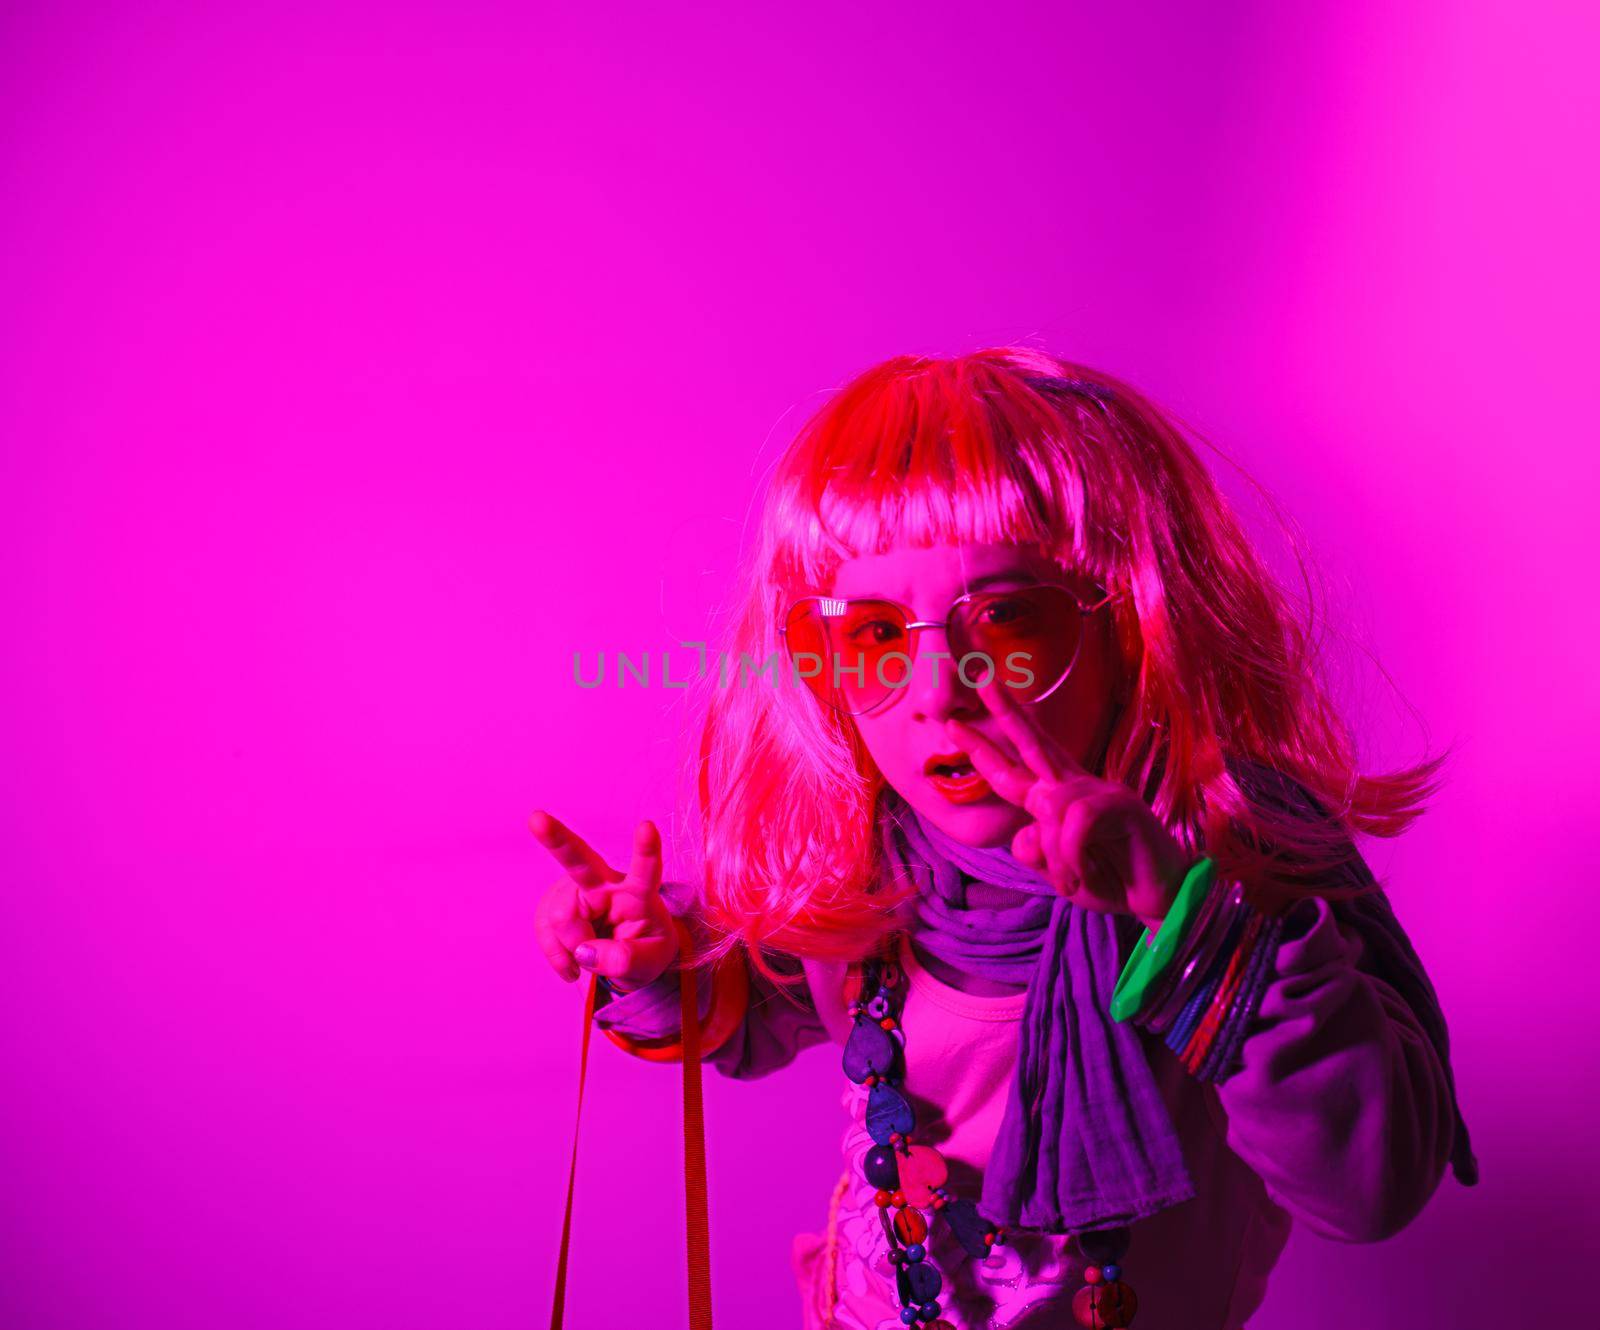 Child wearing a pink wig and heart-shaped sunglasses posed for a photo shooting on fuchsia background